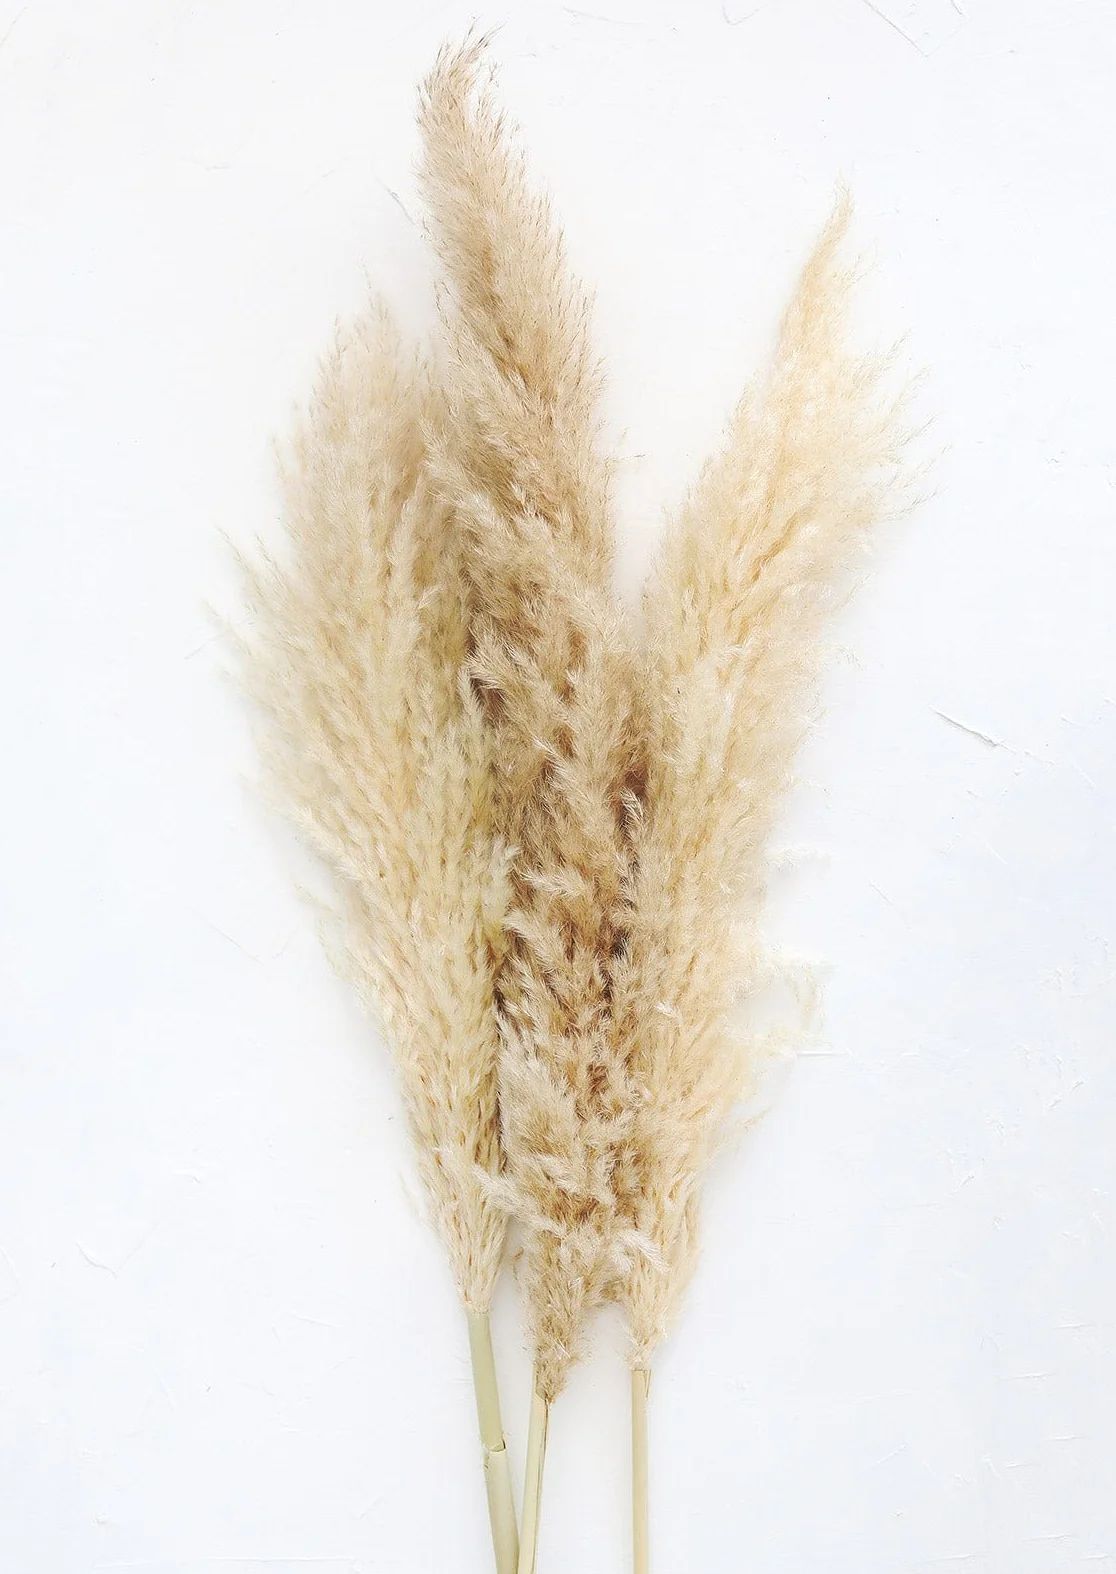 Dried Pampas Grass | Naturally Dried Grasses & Flowers | Afloral.com | Afloral